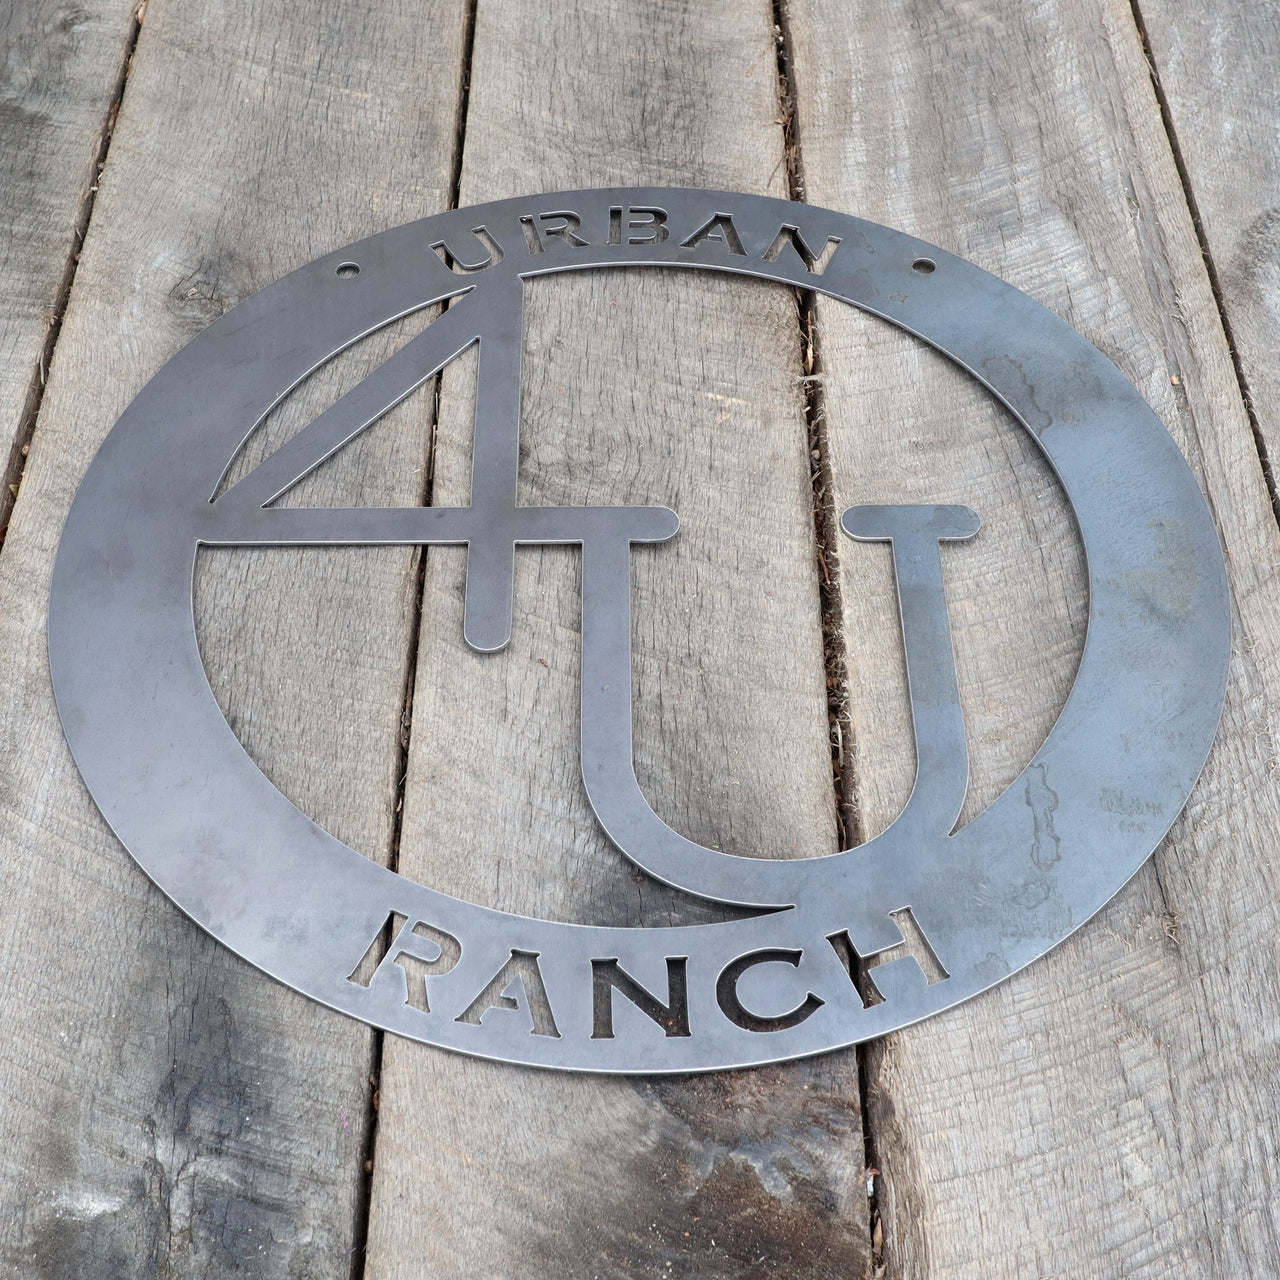 Your Own Custom Brand! Metal Cattle Brand Sign - Ranch, Farm, House, Home, Last Name, Family